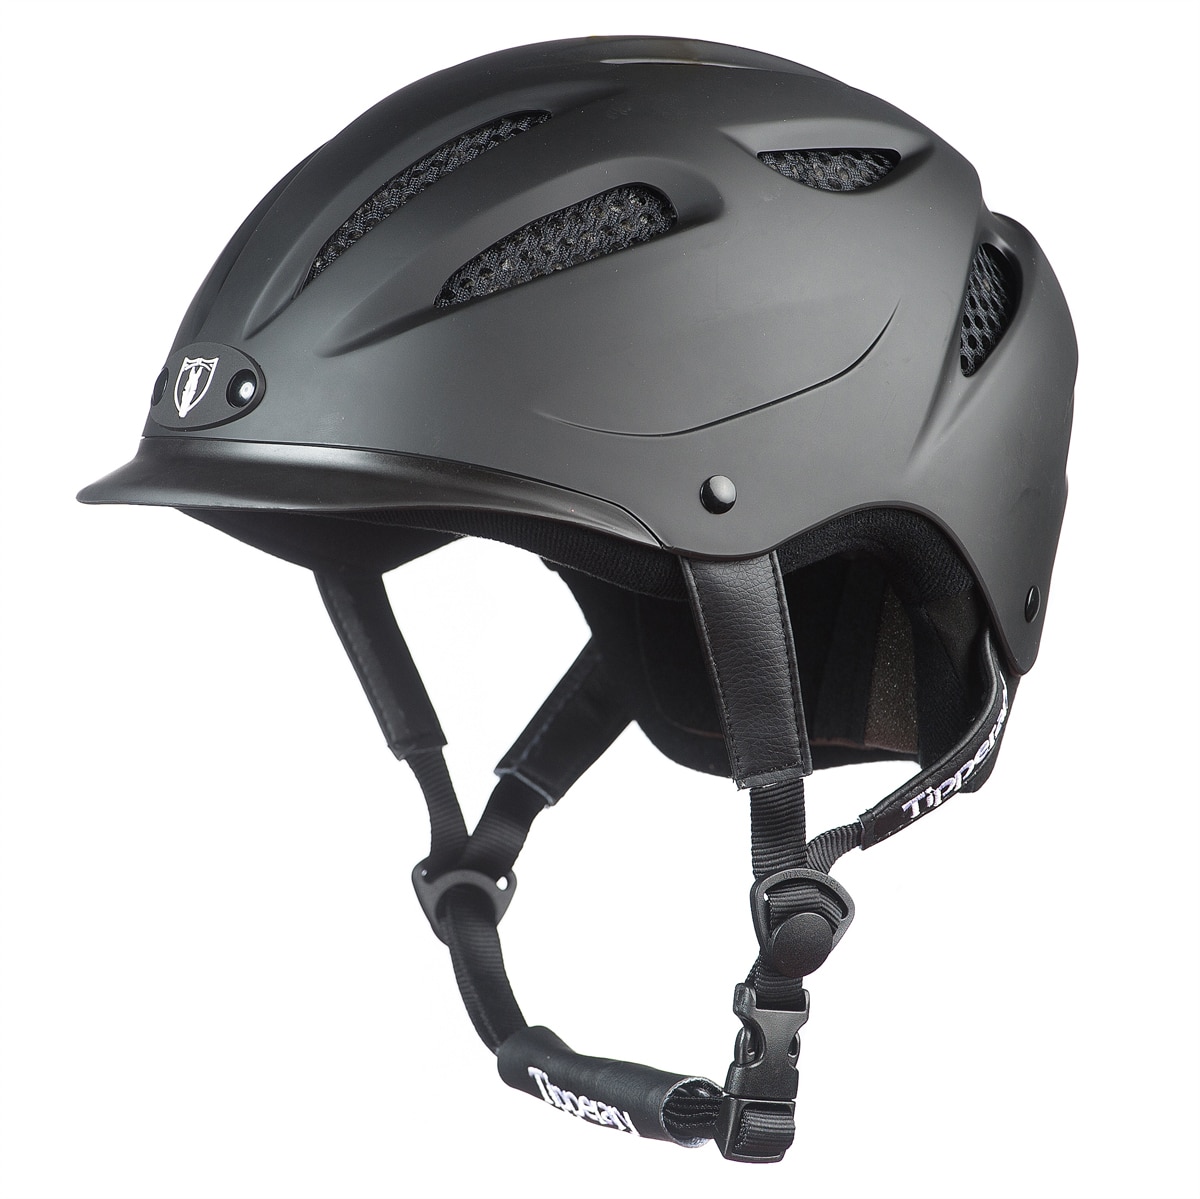 Tipperary Riding Helmet Sportage 8500 Horse Equestrian Low Profile Navy Blue 